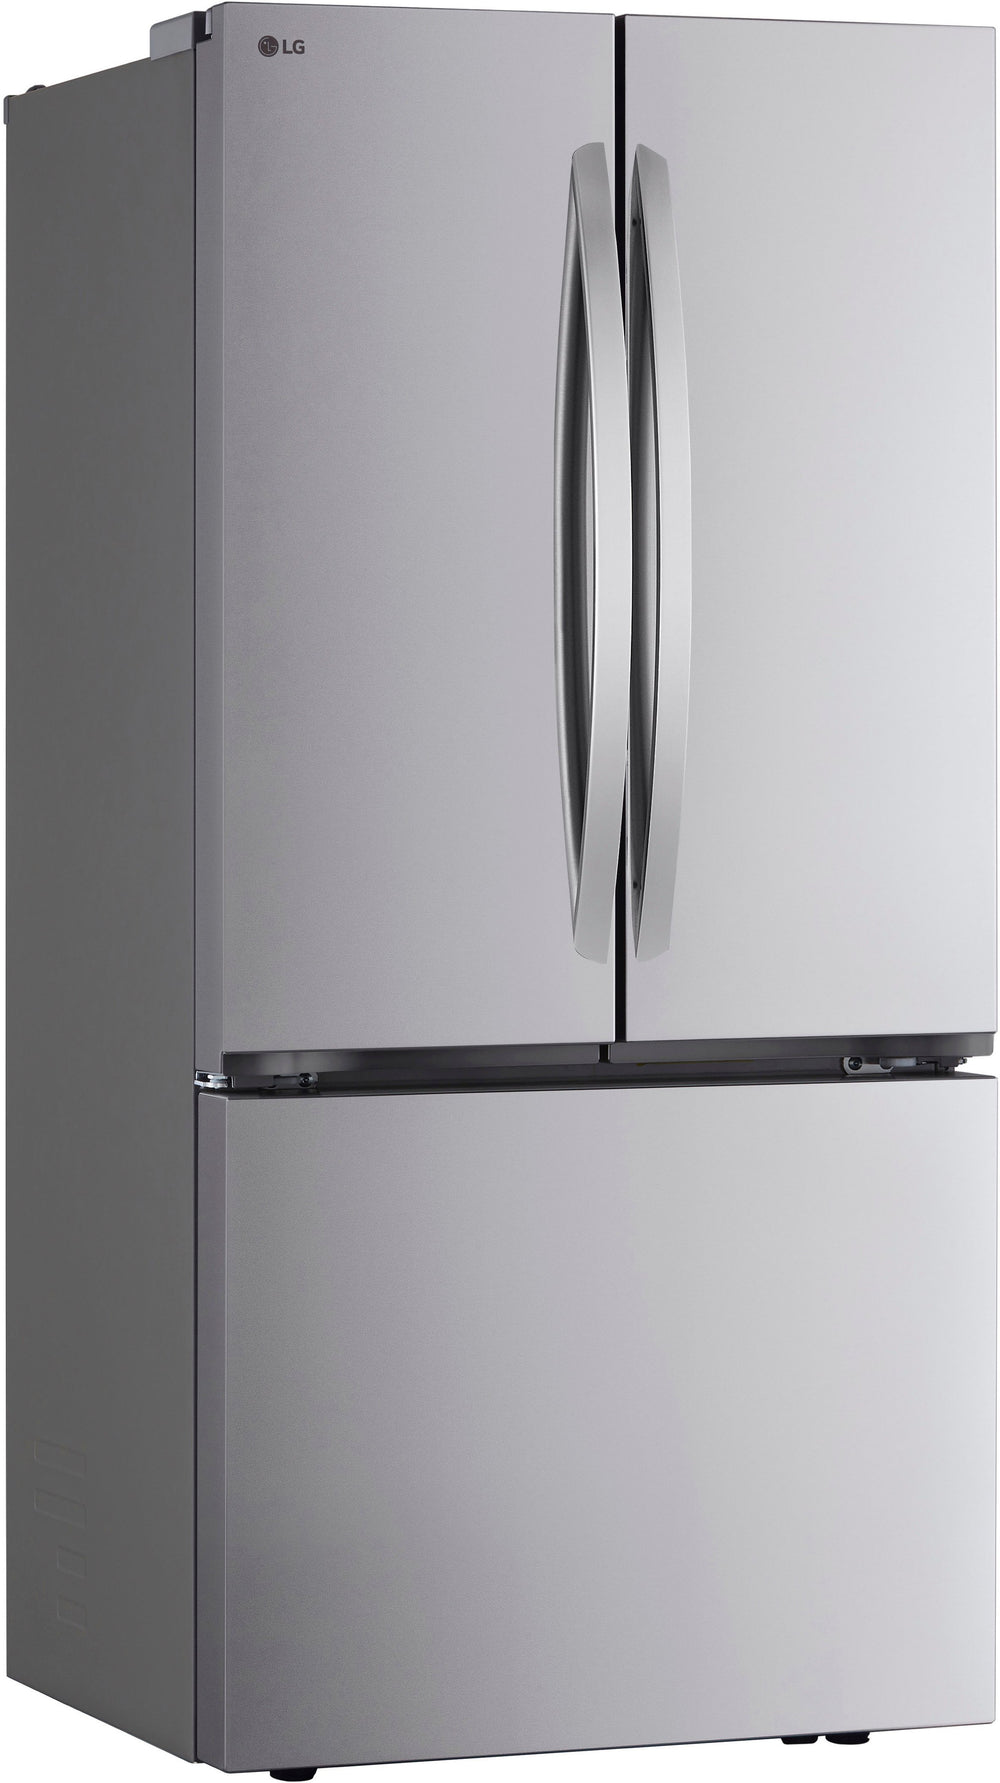 LG - 21 Cu. Ft. French Door Counter-Depth Smart Refrigerator with Ice - Stainless Steel_1